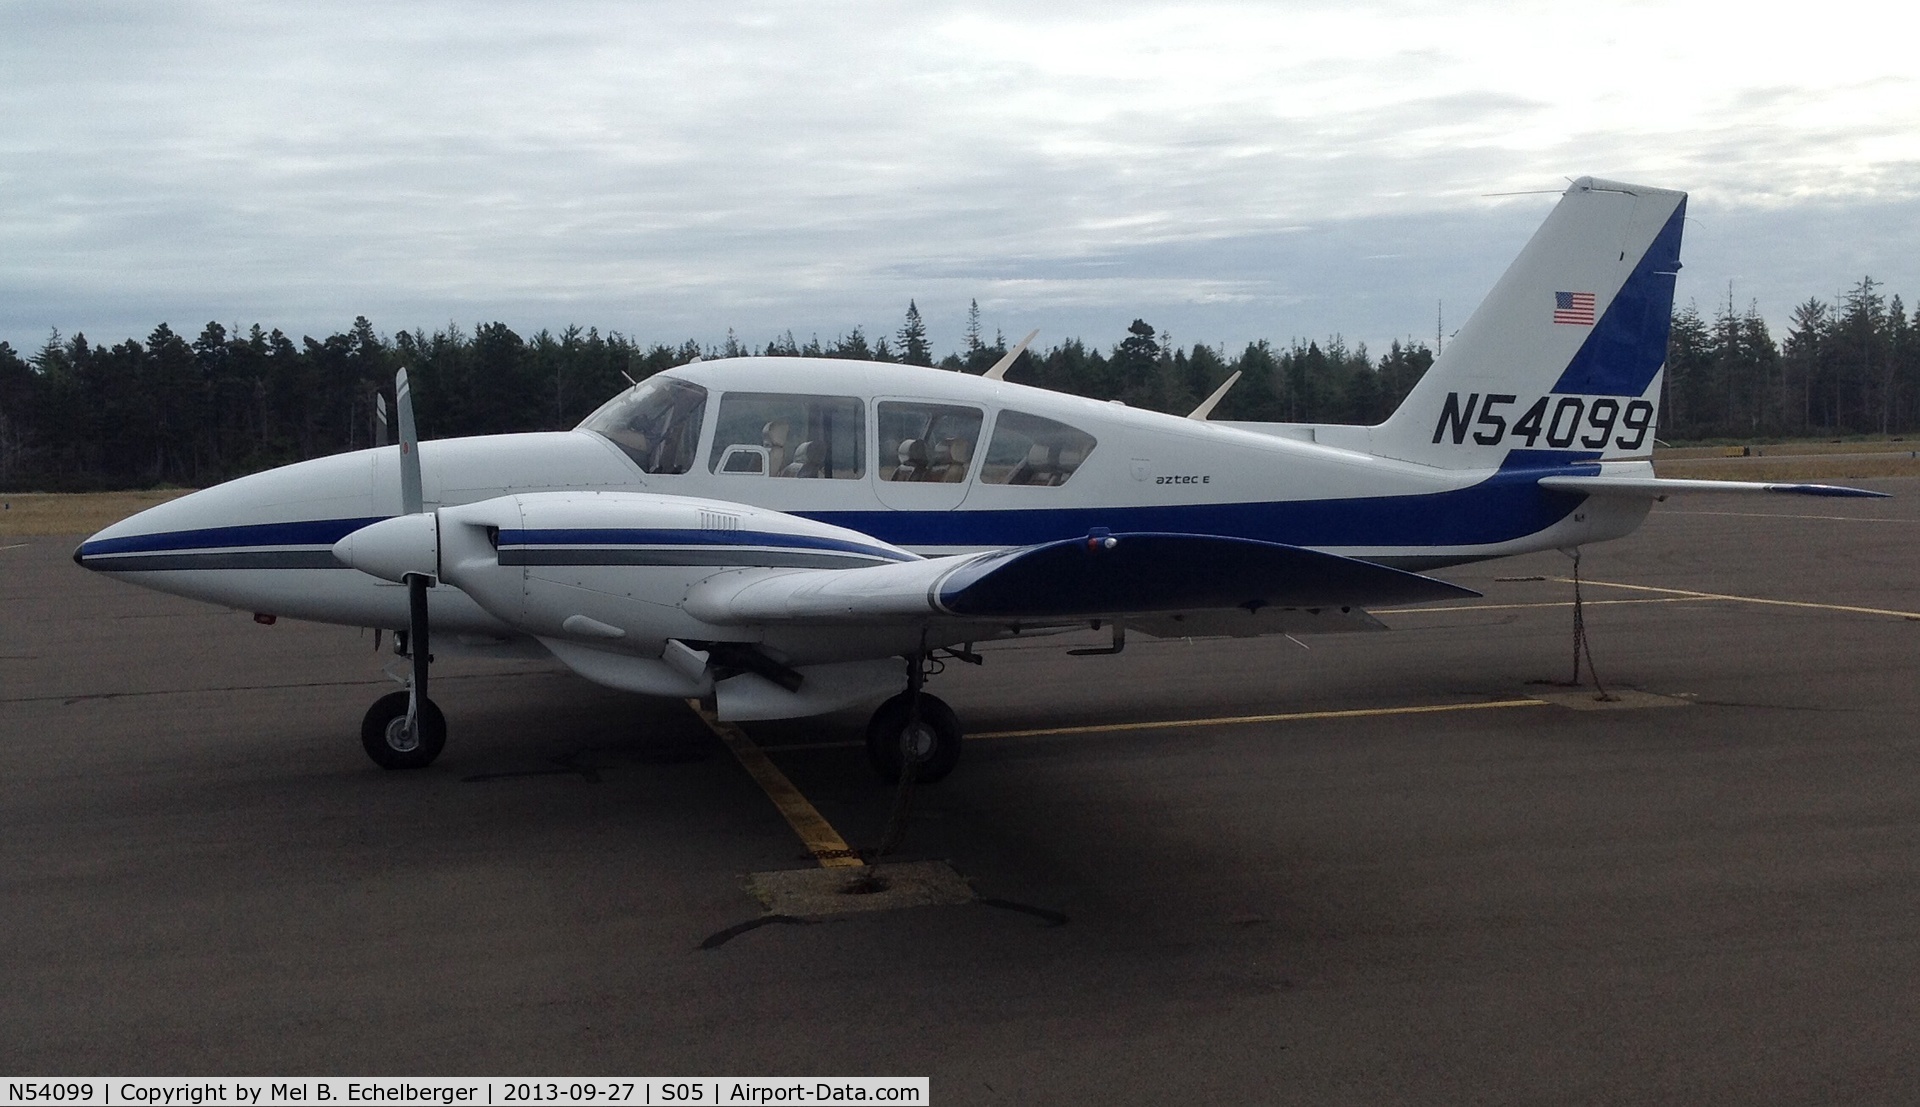 N54099, 1974 Piper PA-23-250 C/N 27-7405411, Another pretty good flying day in Bandon Oregon and on the Oregon coast....